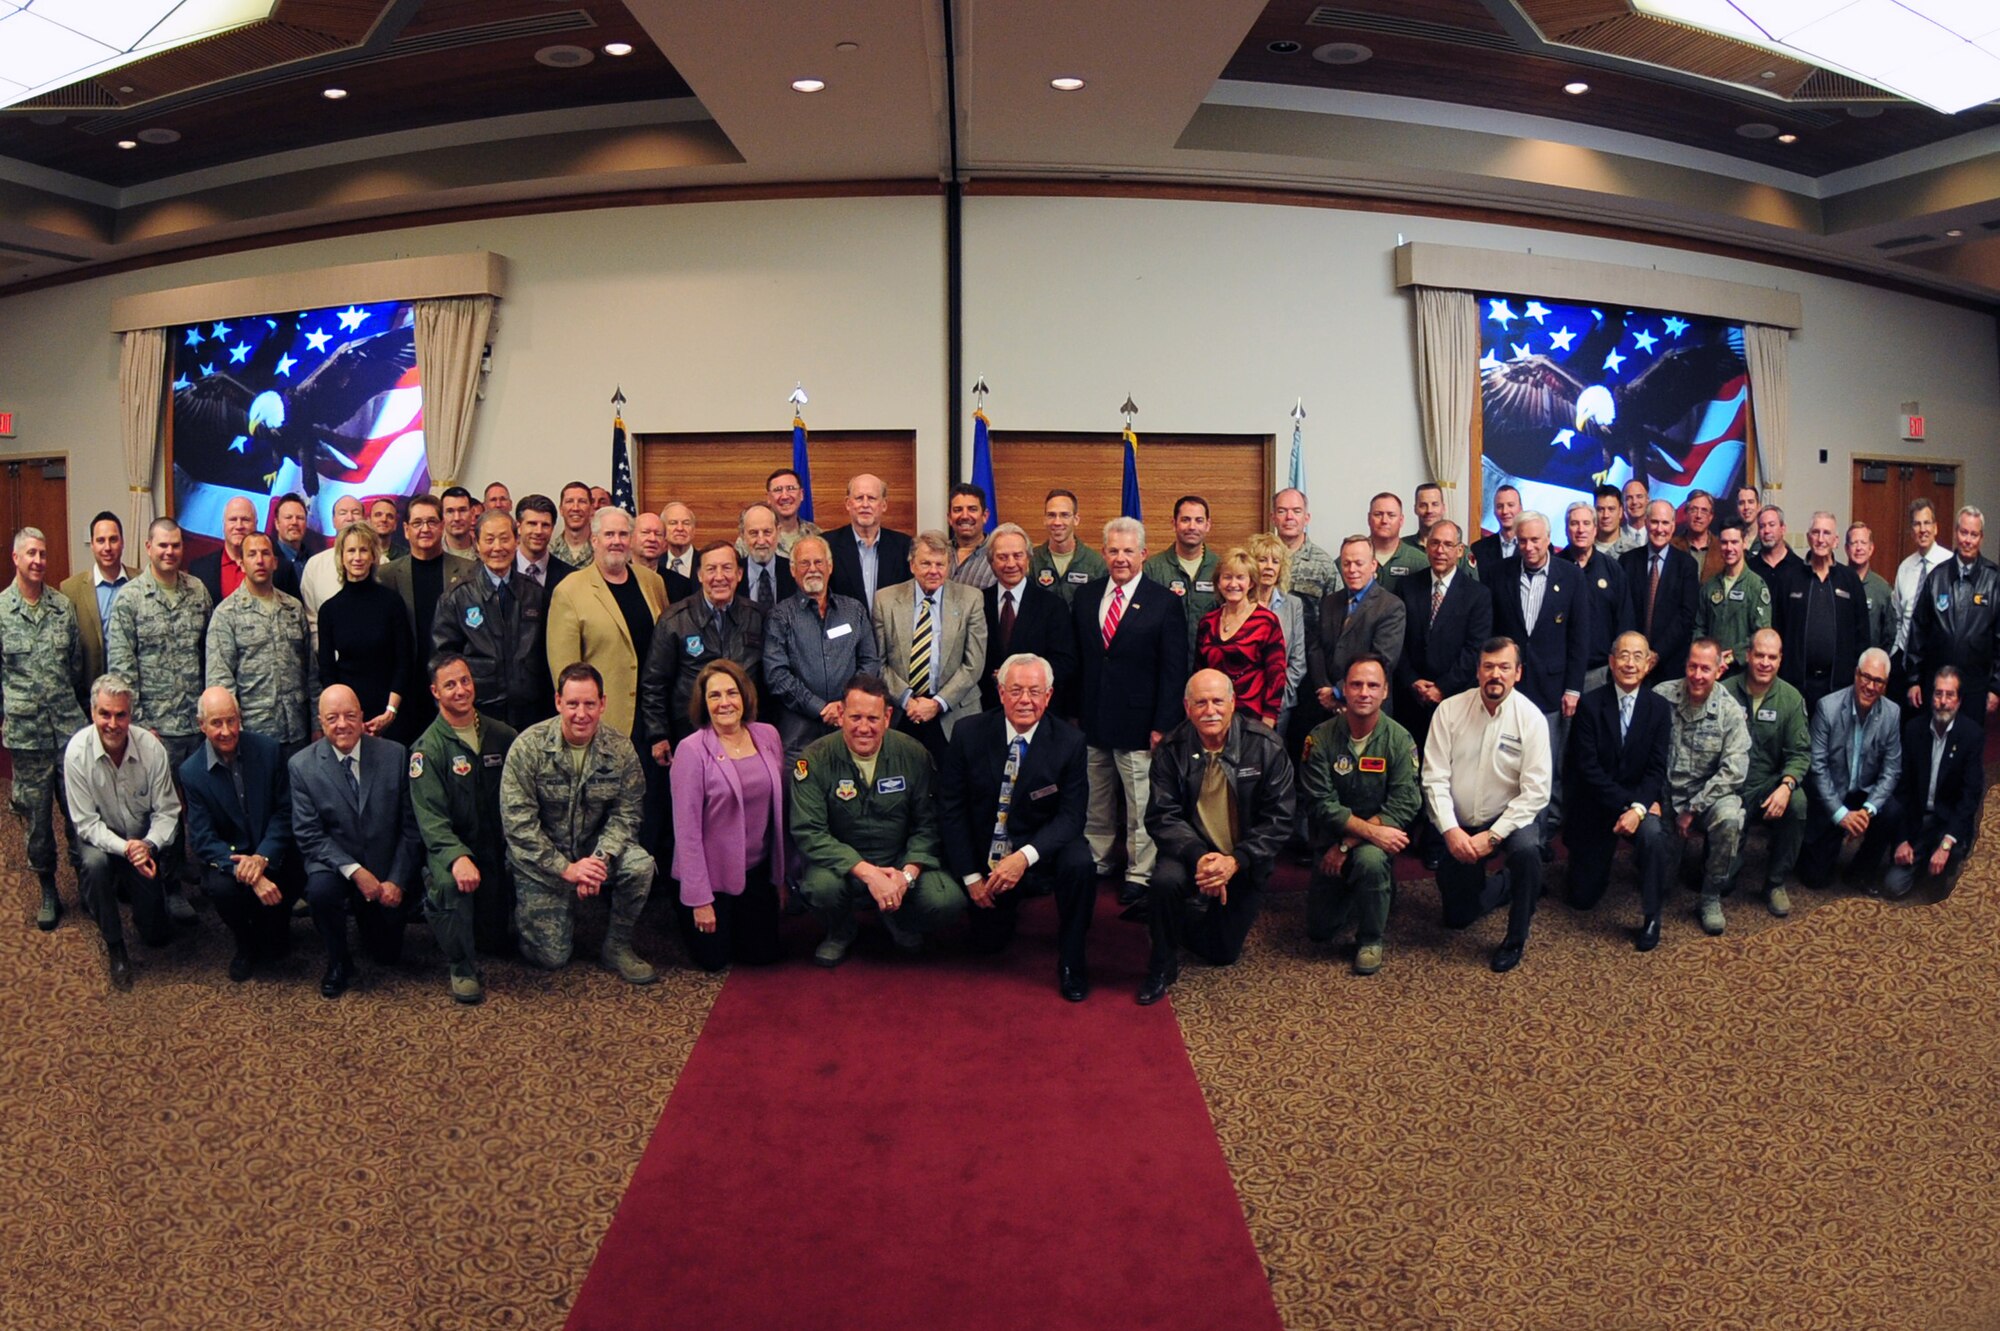 Members of the Nellis Support Team and new honorary commanders pose for a group photo during a commander's call at Nellis Air Force Base, March 9, 2012.  Leaders from across the Las Vegas valley gathered to hear the latest regarding Nellis and Creech Air Force Bases and the Nevada Test and Training Range. (U.S. Air Force photo by Staff Sgt. William P.Coleman)